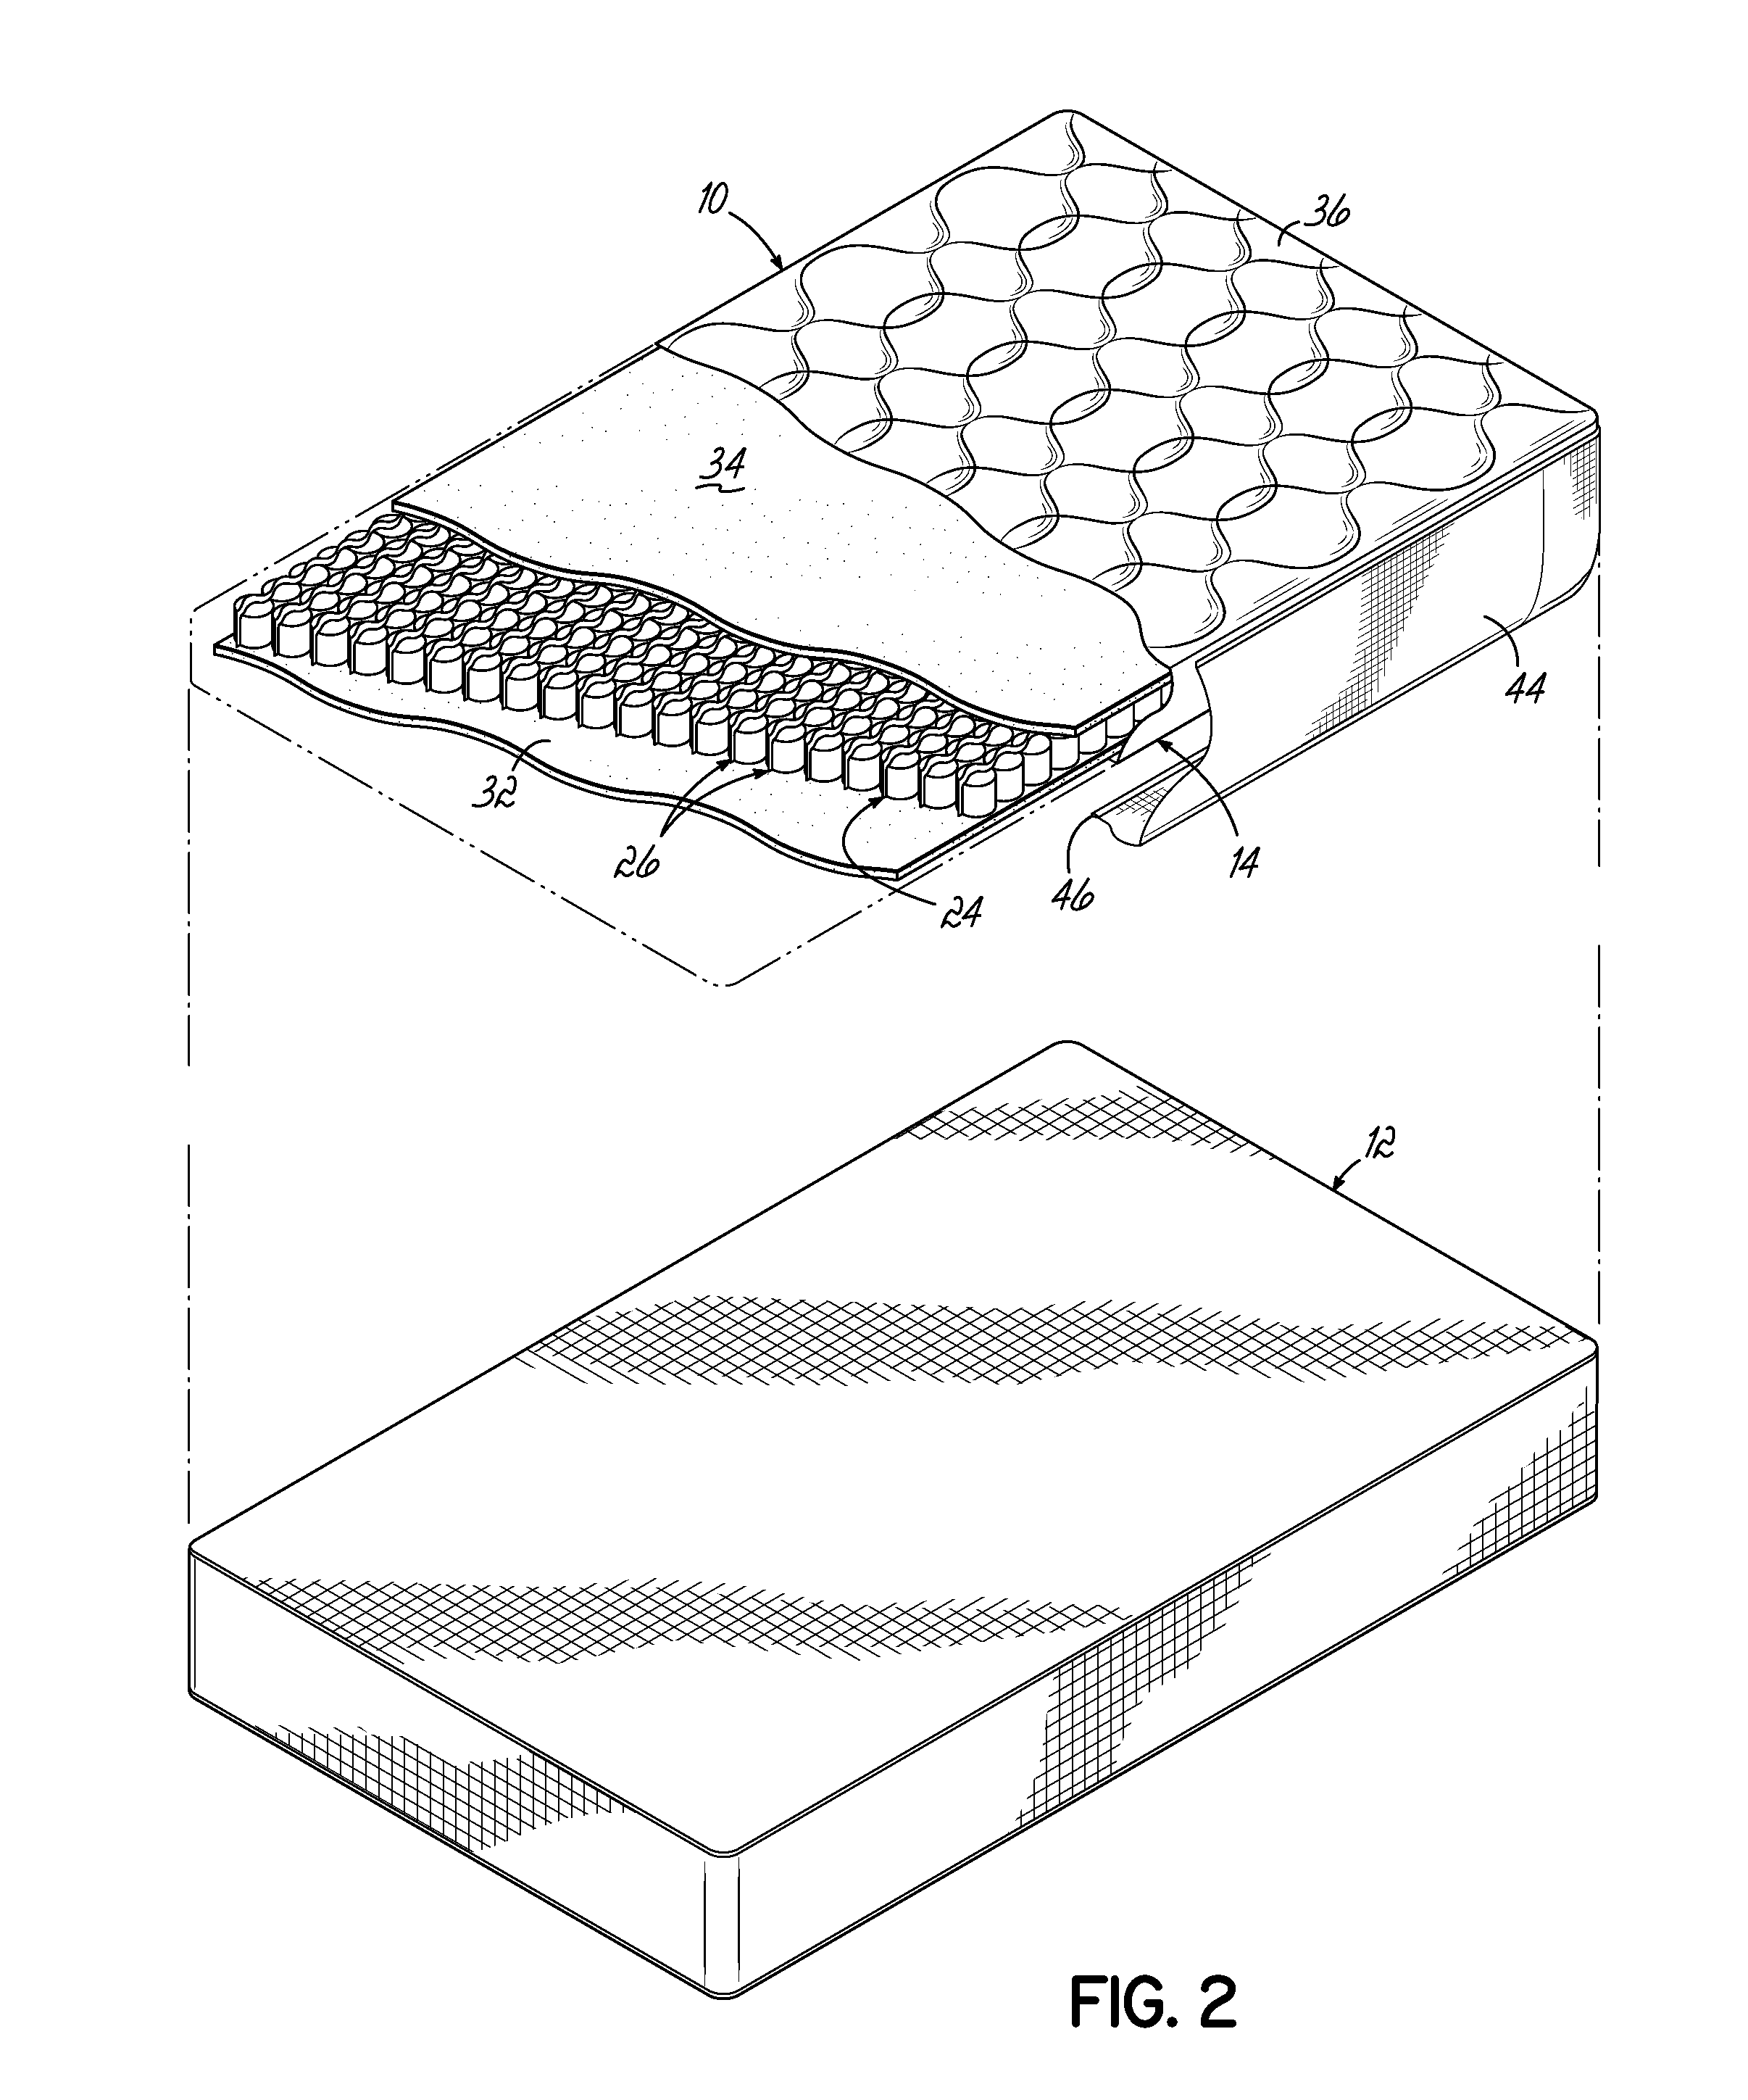 Mattress Topper Comprising Pocketed Spring Assembly With At Least One Cushioning Layer